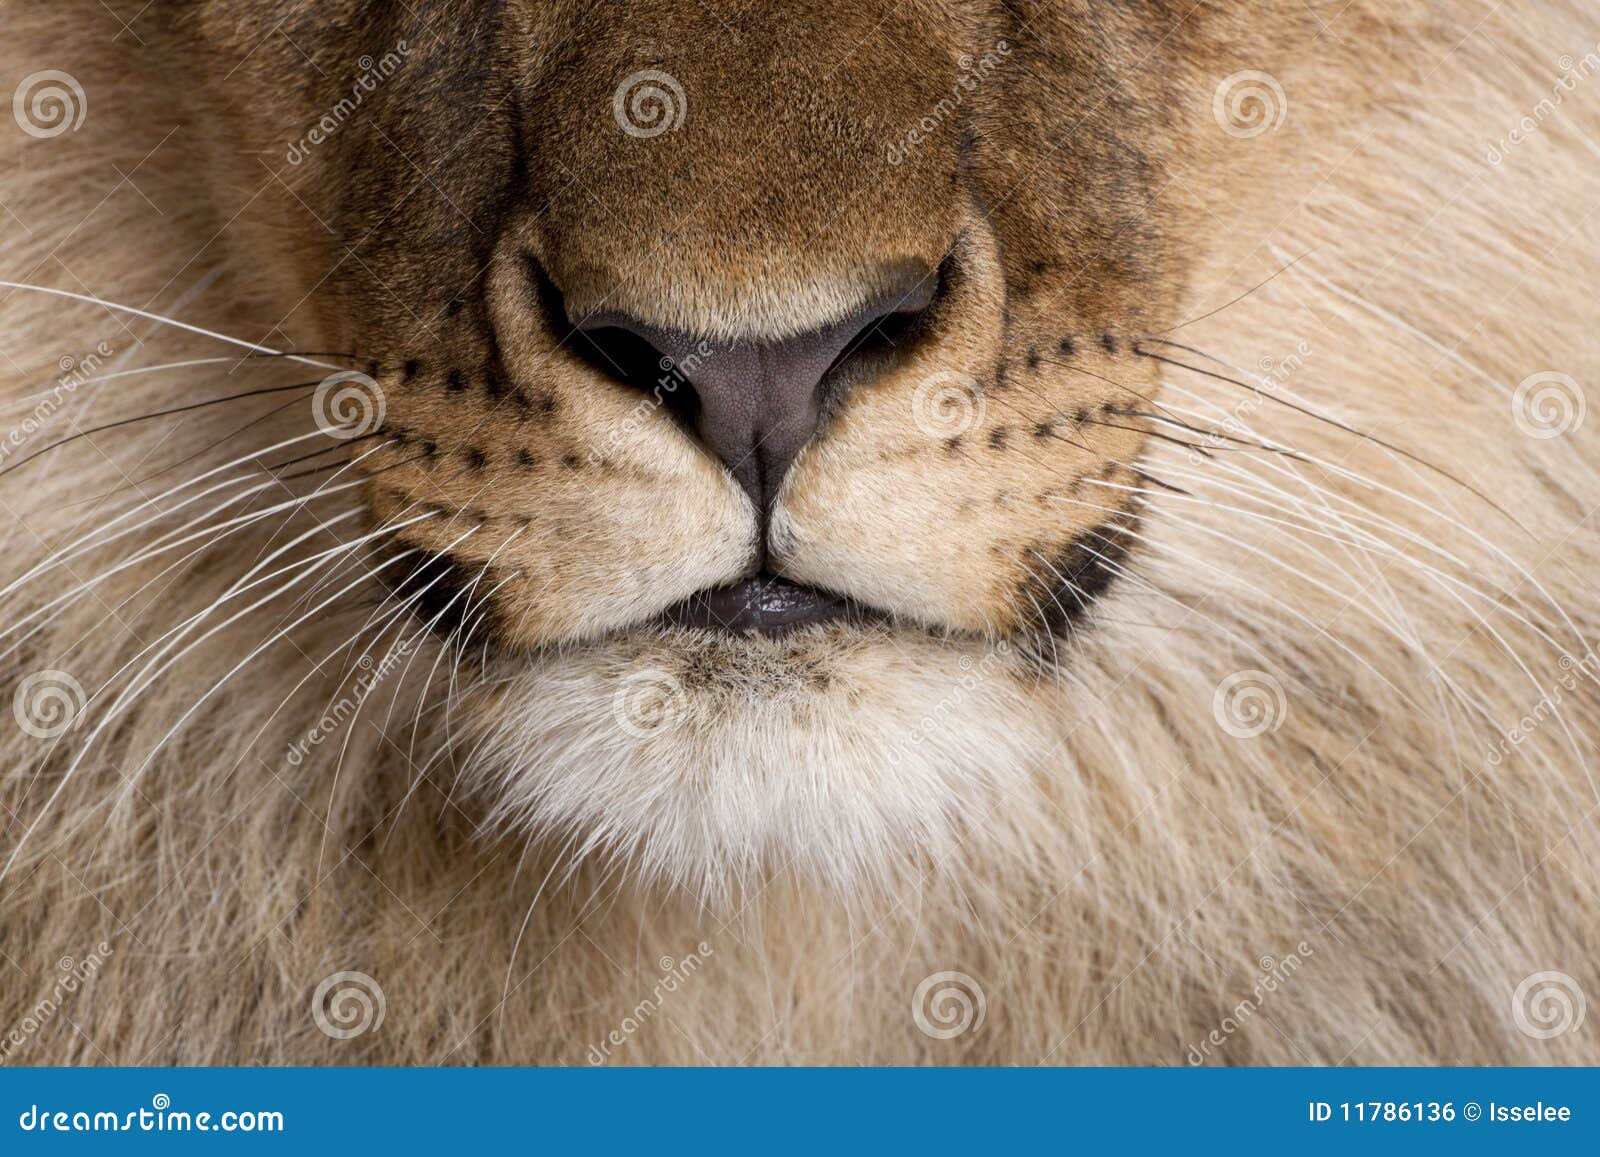 Close up Of Lion s  Nose And Whiskers  Royalty Free Stock 